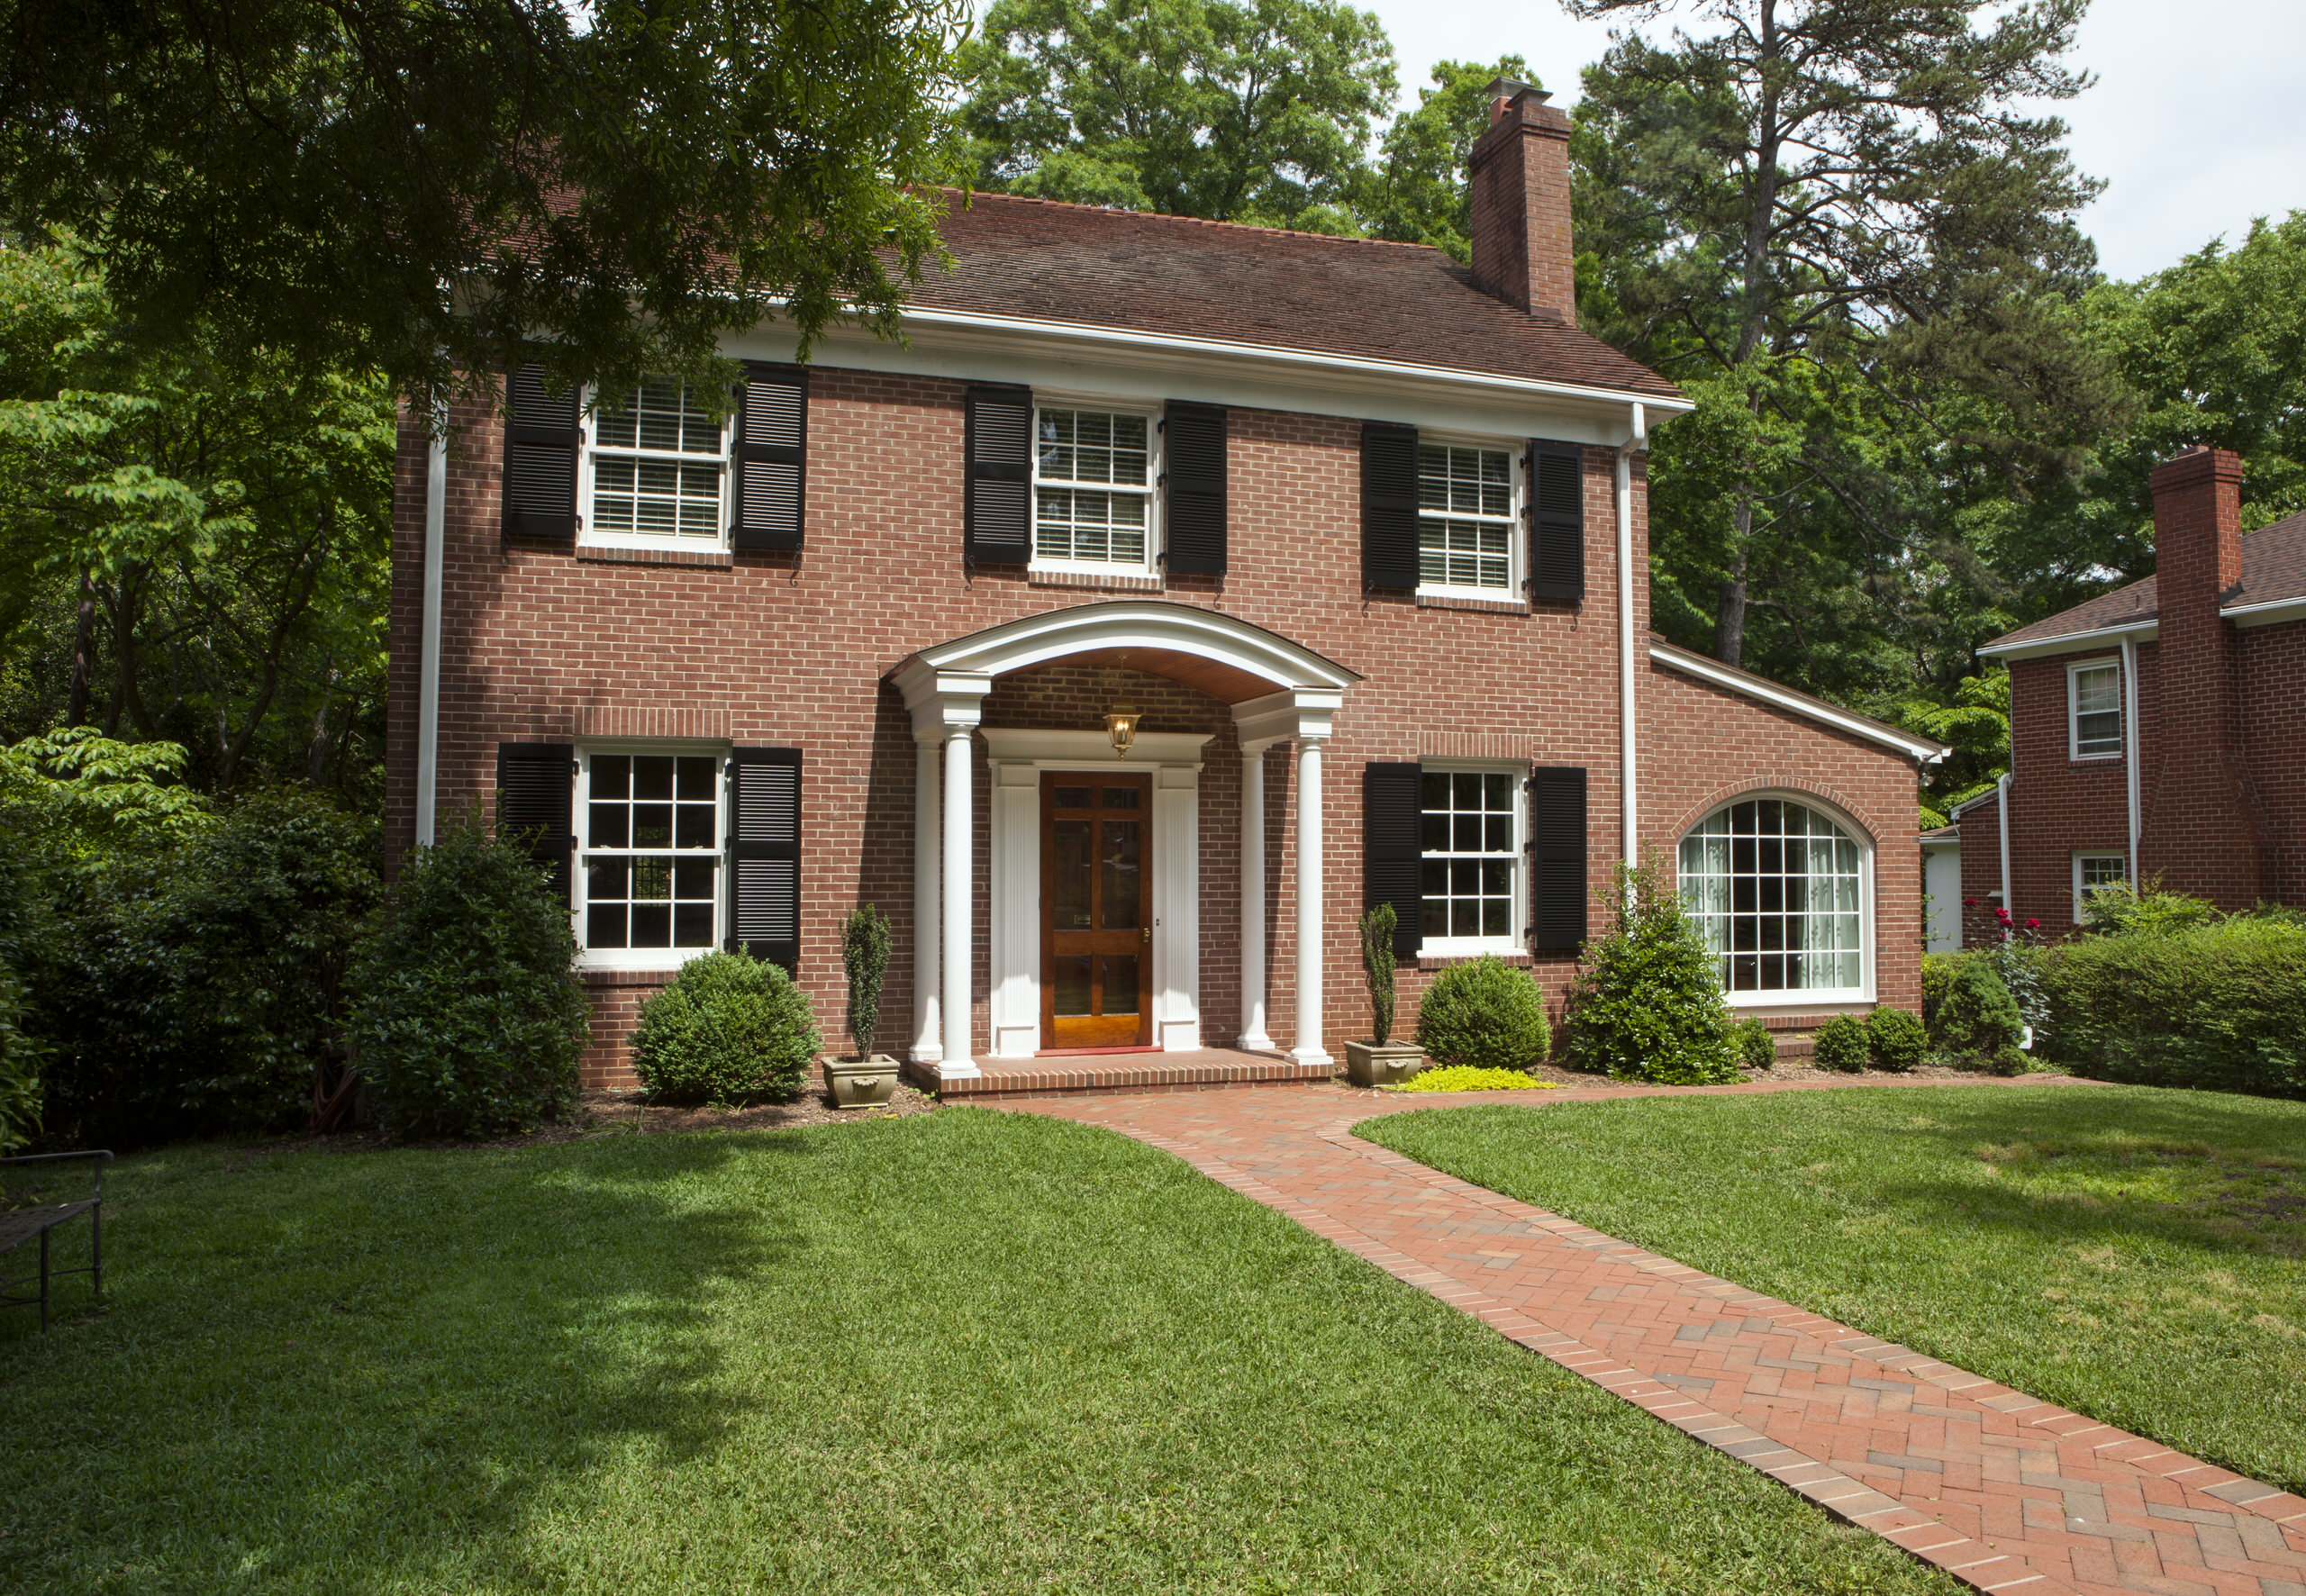 Red Brick And Black Shutters - Photos & Ideas | Houzz